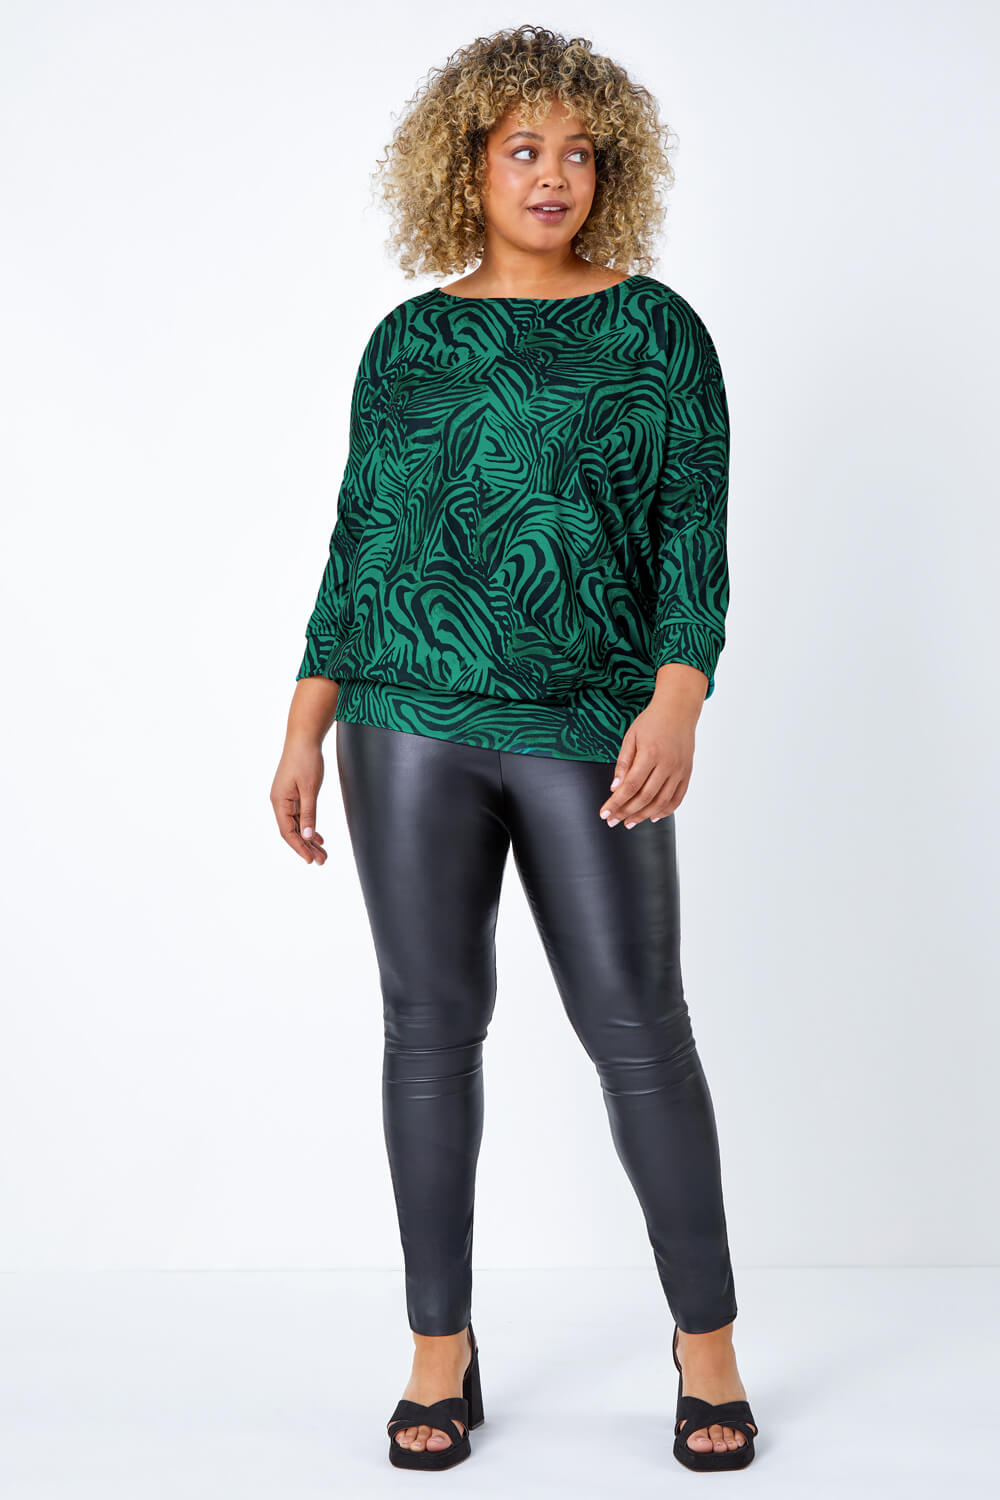 Green Curve Animal Print Blouson Stretch Top, Image 2 of 5